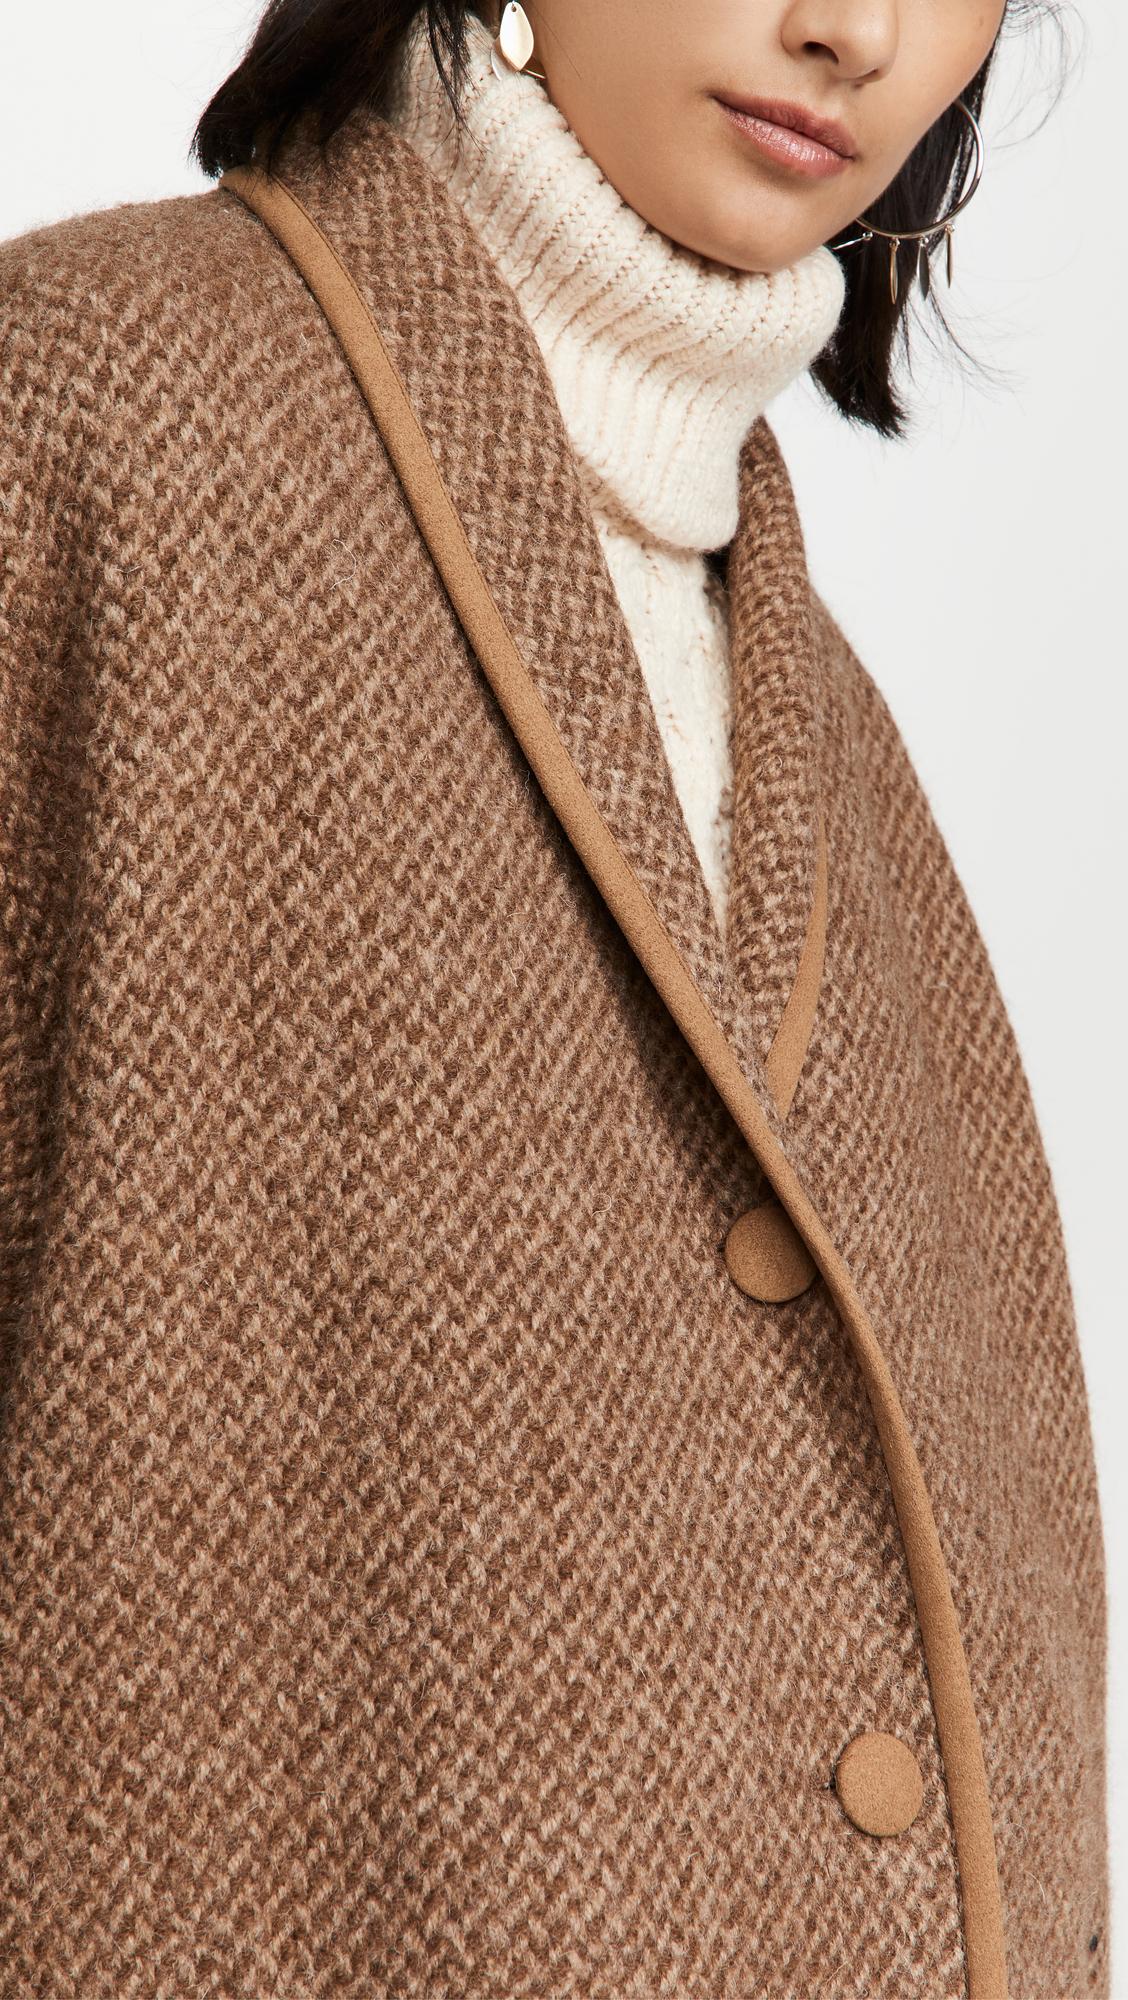 Étoile Isabel Marant Jelanyo Coat in Camel (Brown) - Lyst